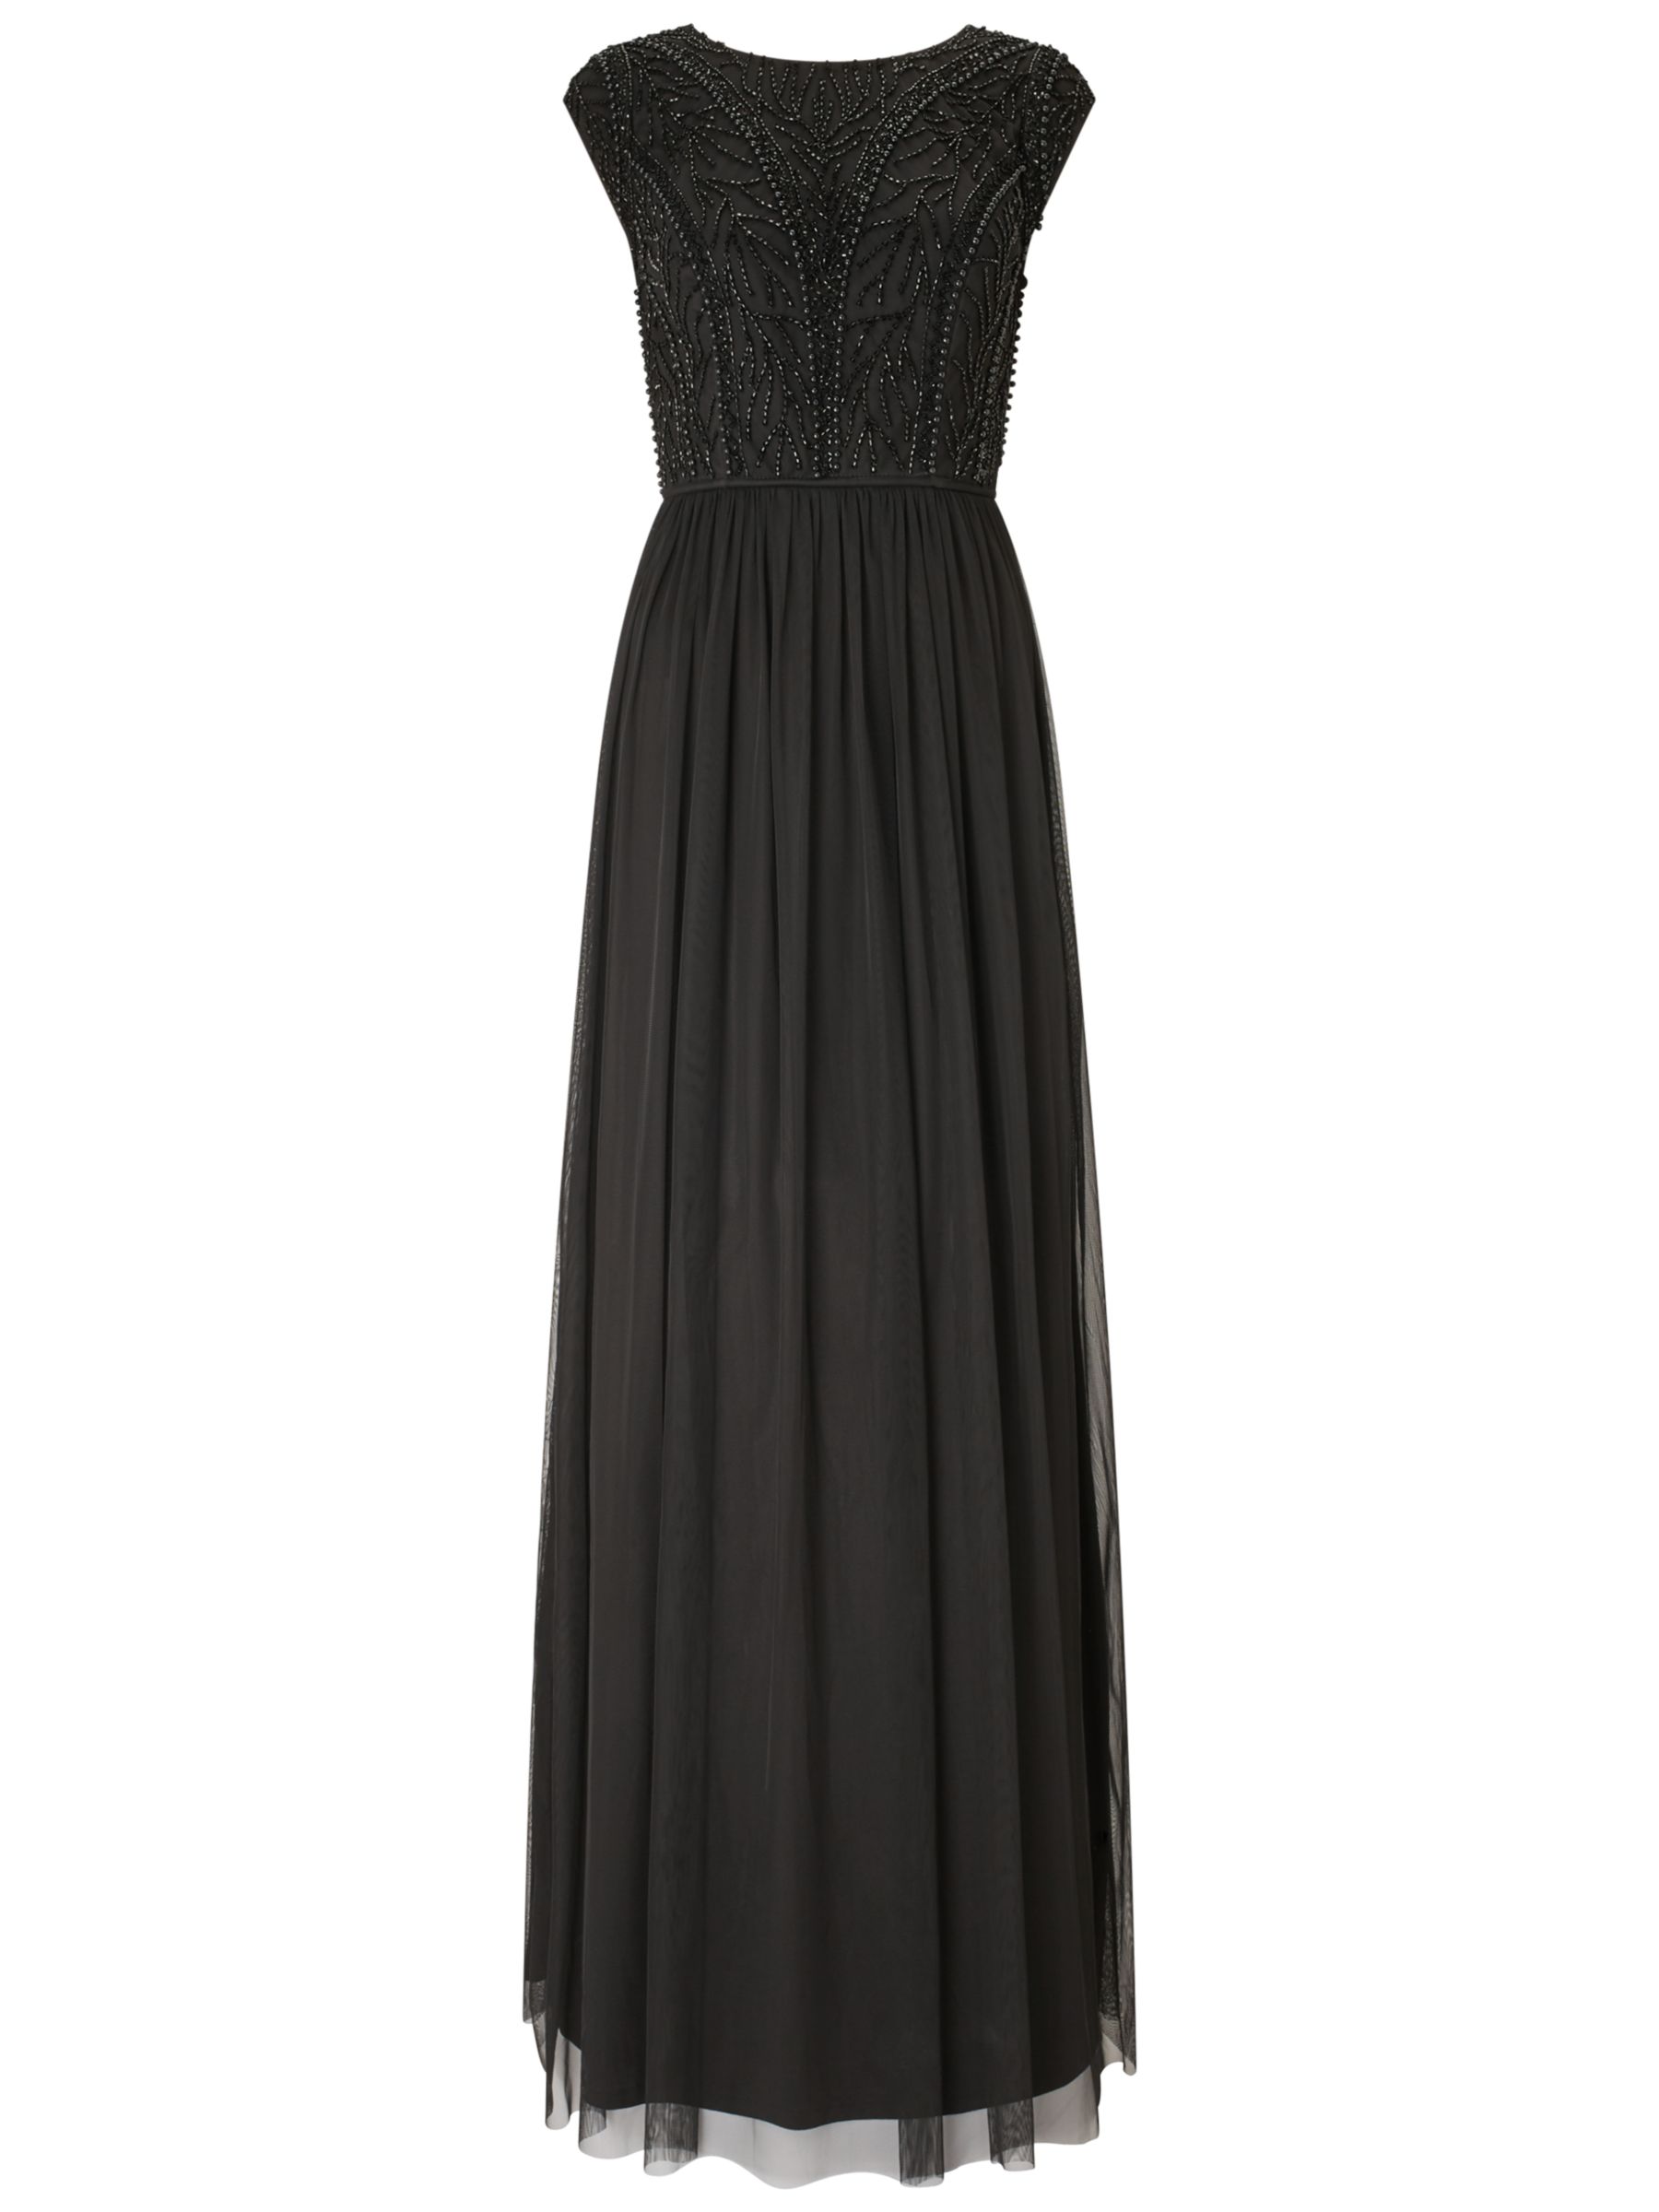 Adrianna Papell Beaded Chiffon Long Gown, Black